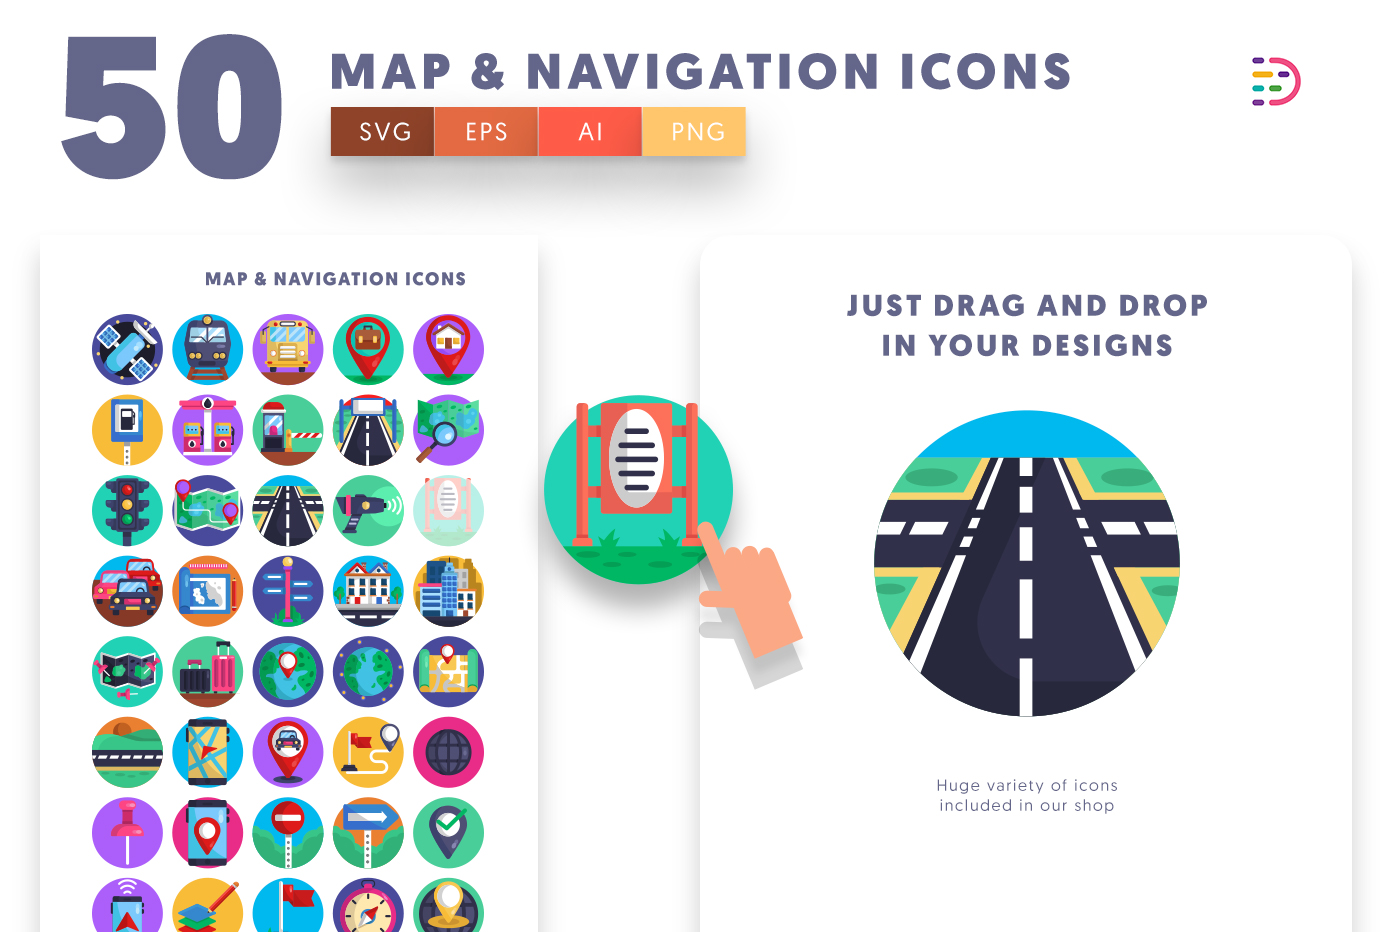  Map and Navigation Icons with colored backgrounds